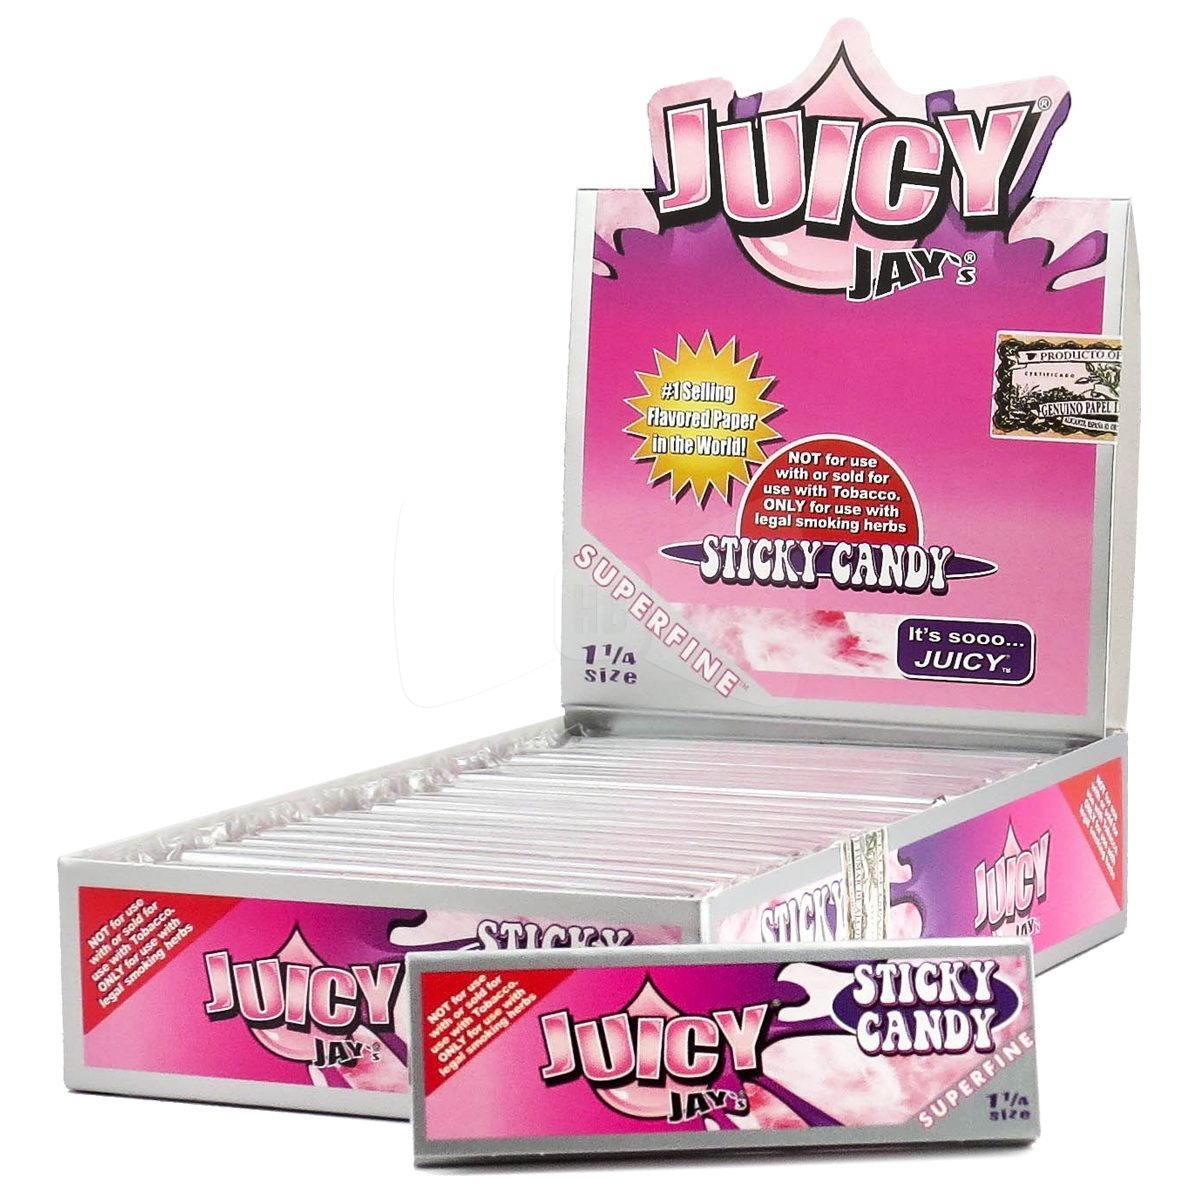 Juicy Jays Super Fine Papers Full Box (24 packs) Sticky Candy